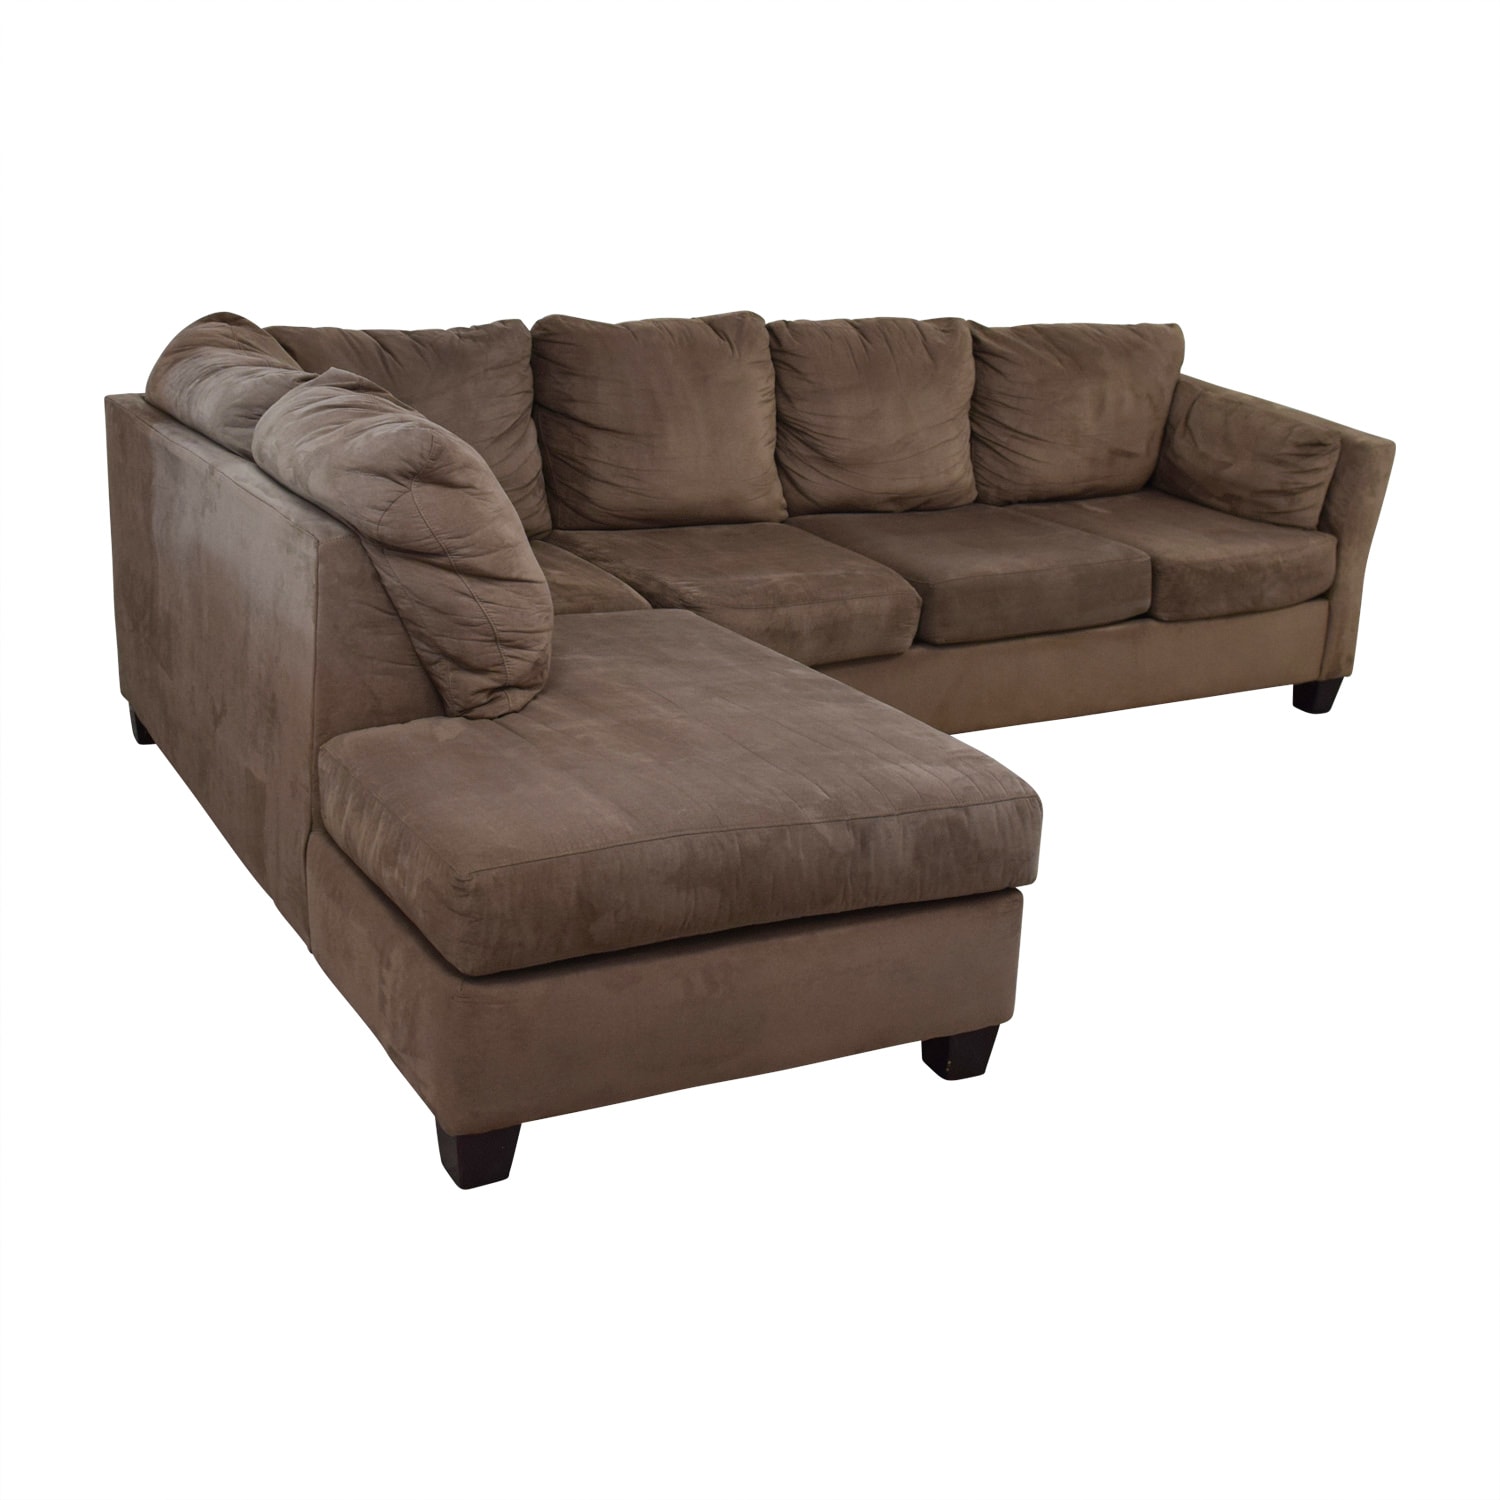 Bobs Furniture Bobs Furniture Brown Microfiber Sectional used